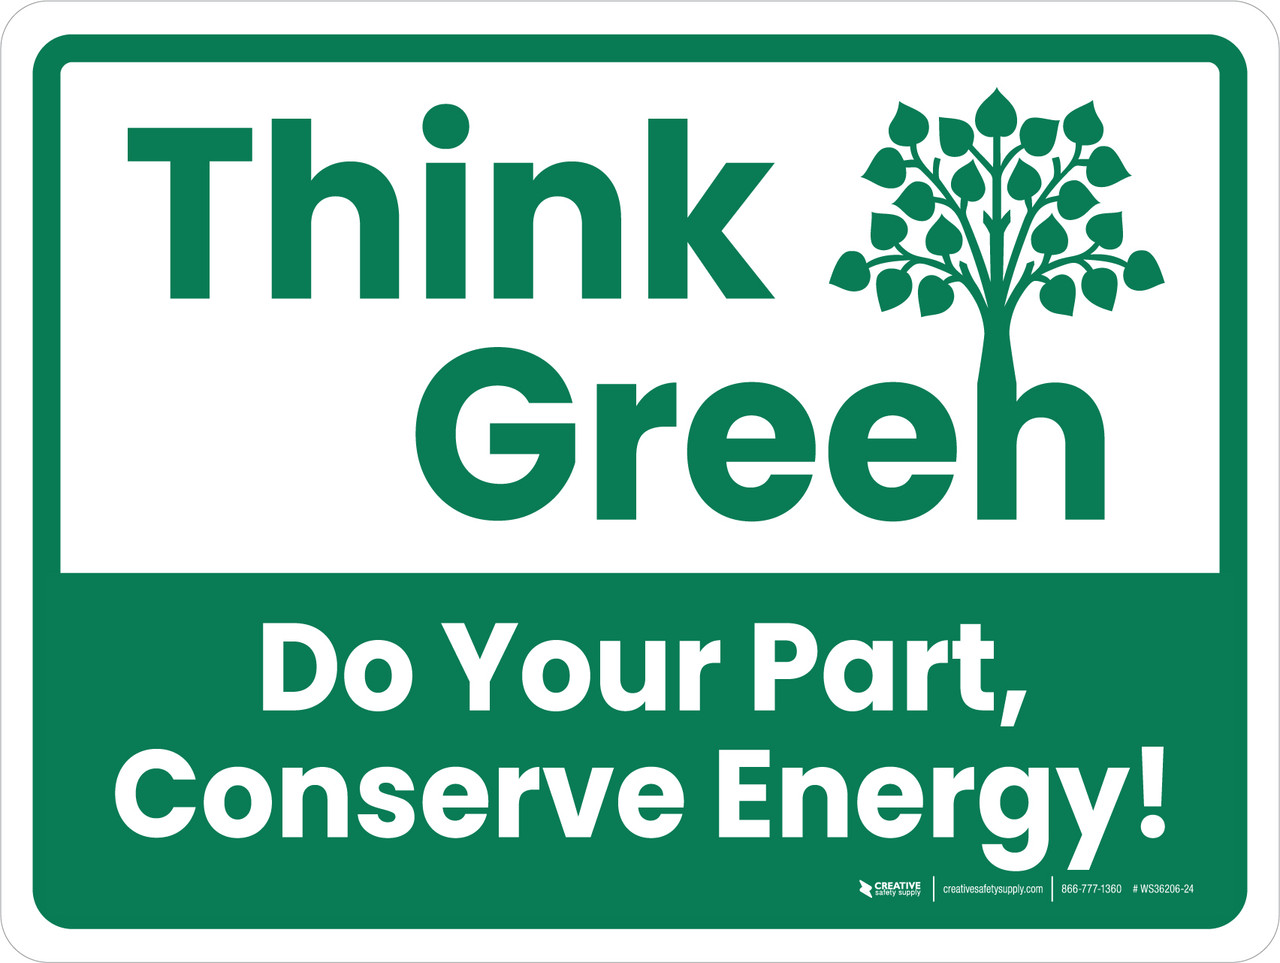 Think Green Do Your Part to Conserve Energy with Icon Landscape - Wall Sign